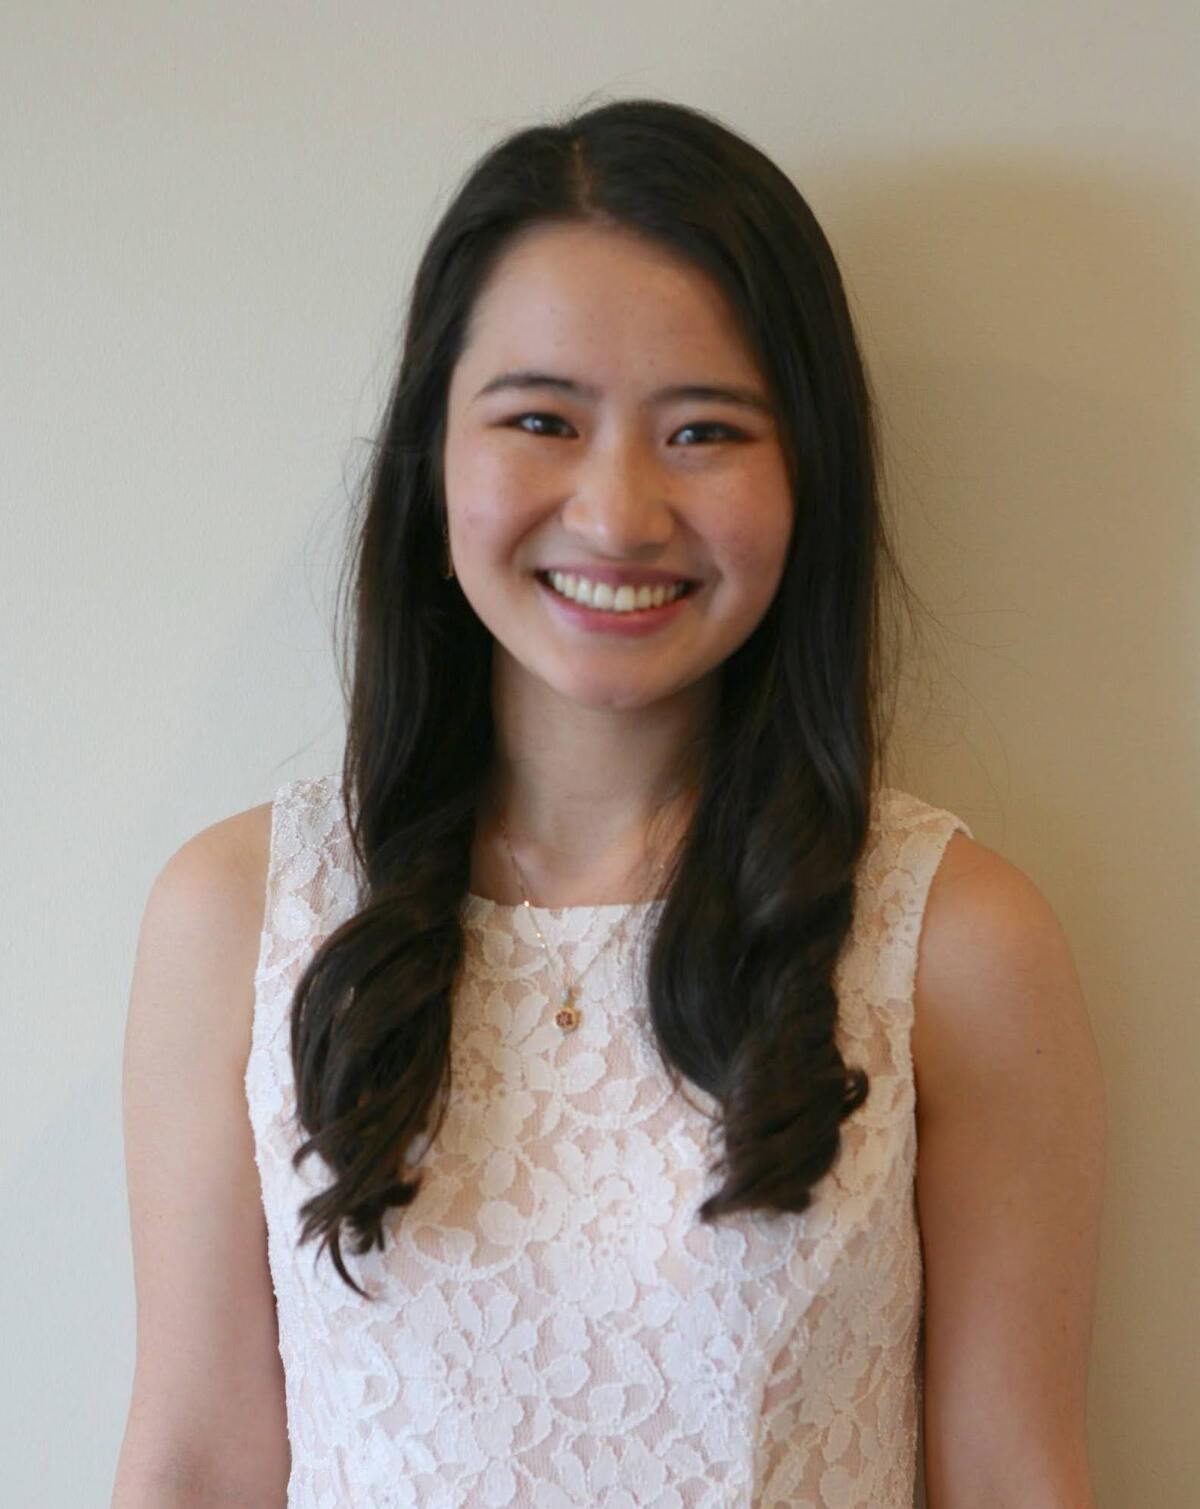 Heidi Banh, a third-year medical student at UC San Diego, worked with Shapiro to design the intergenerational study.